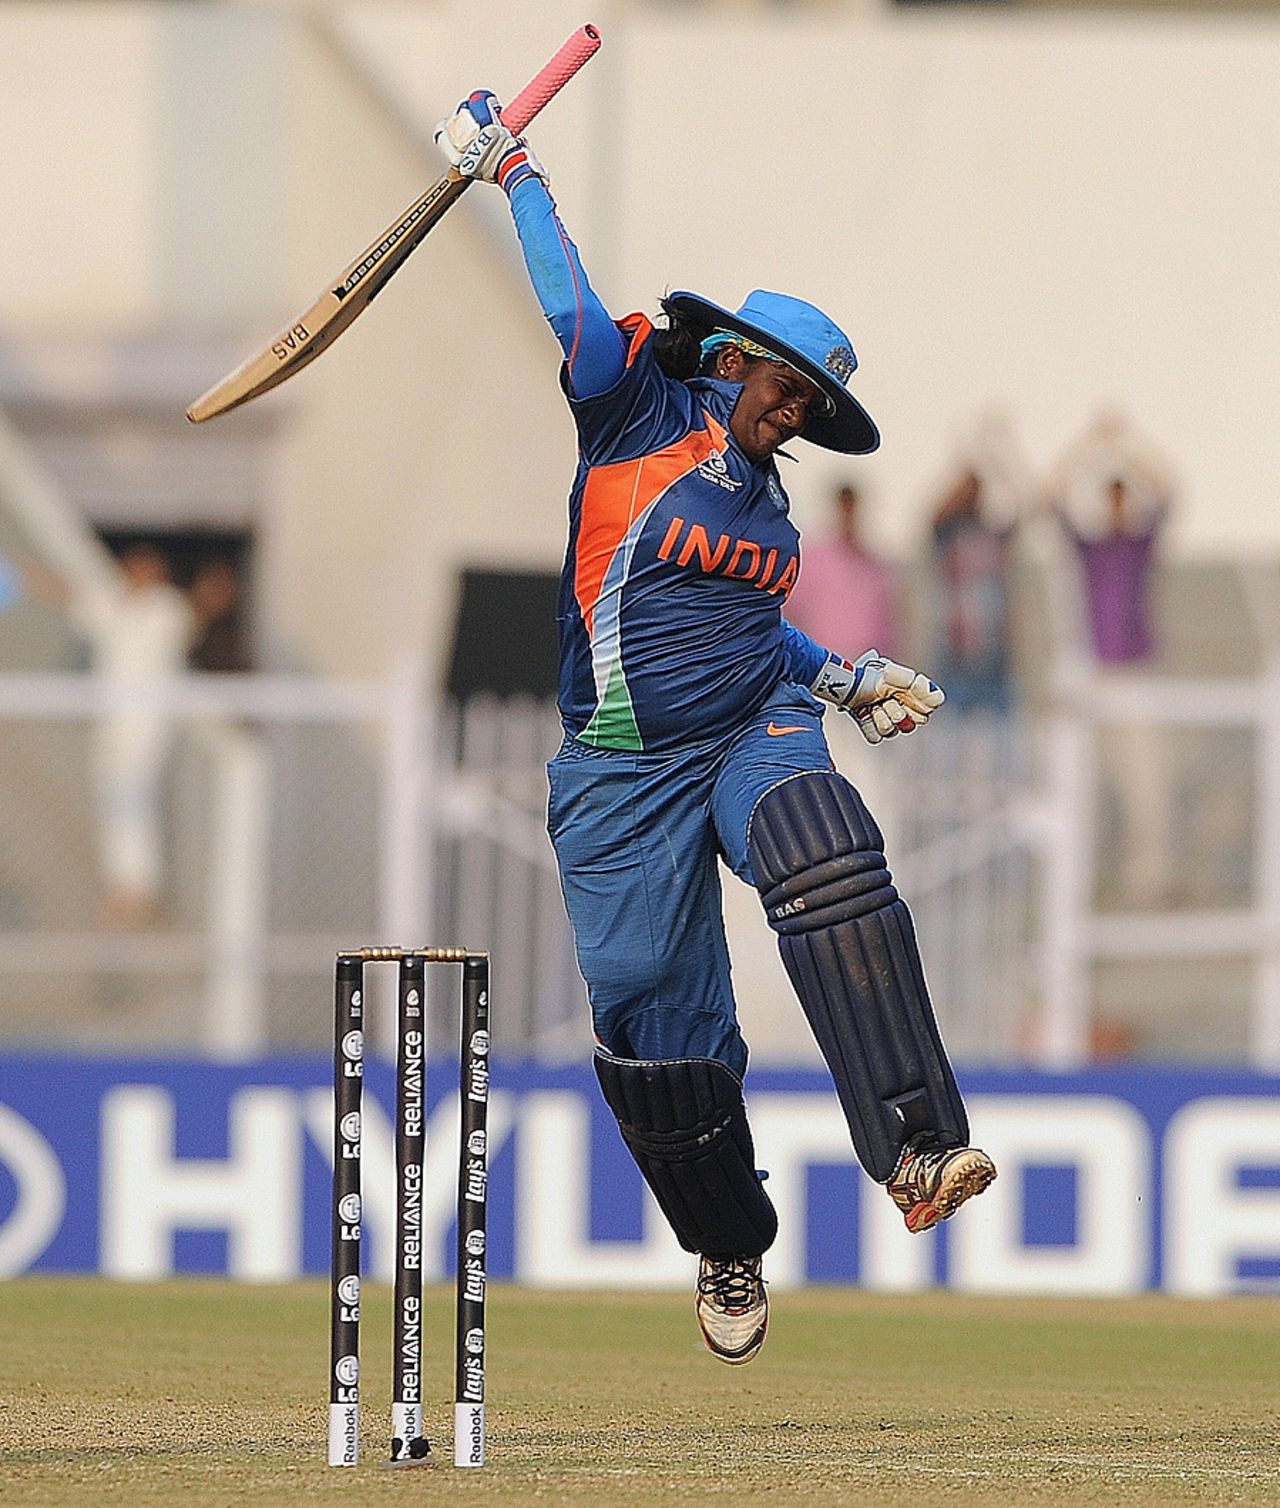 Thirush Kamini reacts after scoring her maiden century, India v West Indies, Women's World Cup 2013, Group A, Mumbai, January 31, 2013